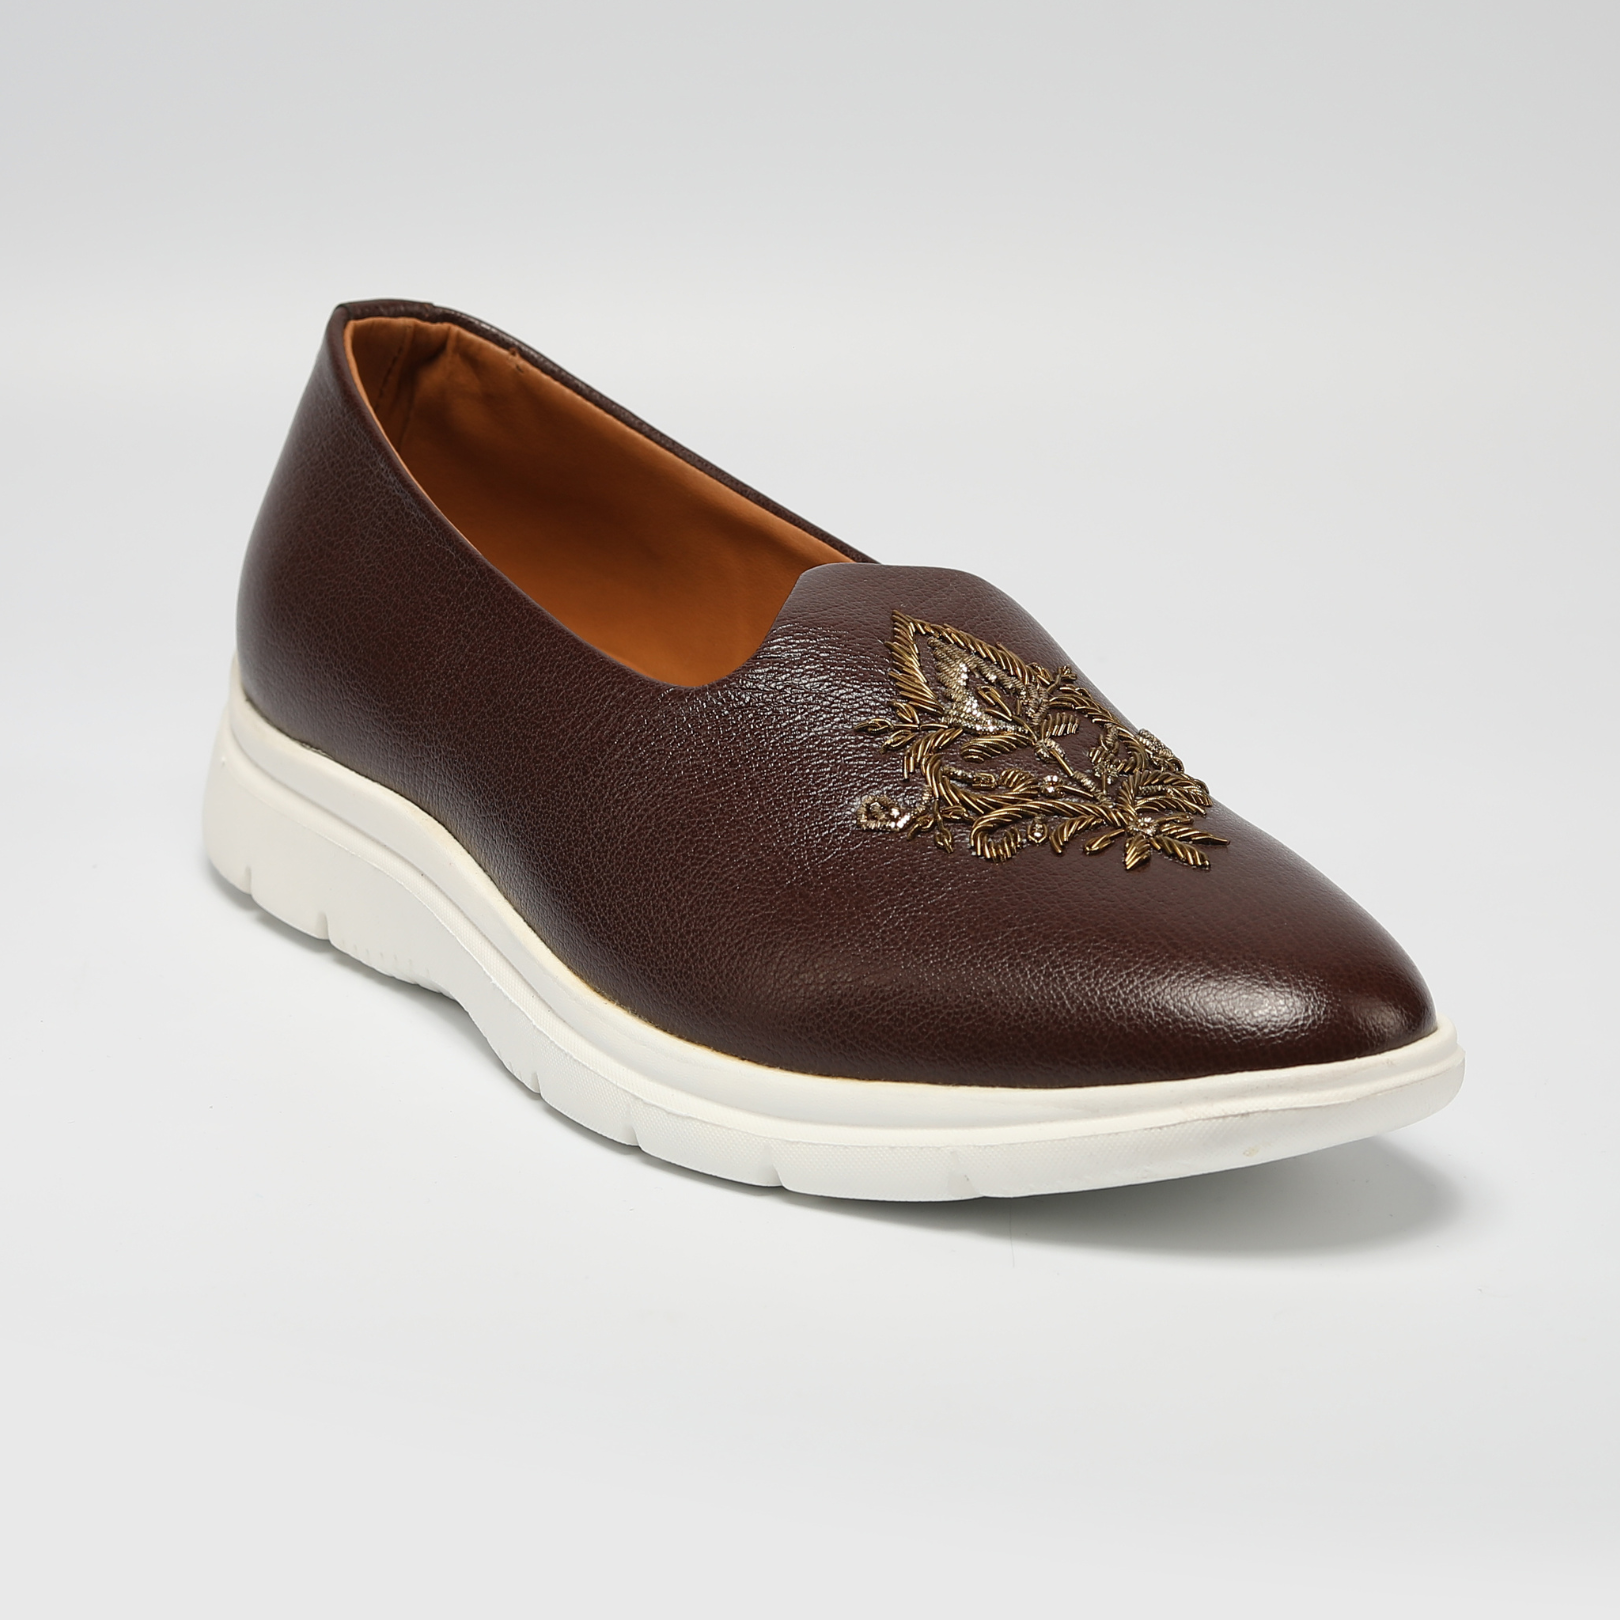 A brown leather slip on shoe with an embroidered design, perfect for those seeking an ethnic touch to their footwear collection - Monkstory ReMx Mojari Sneakers.